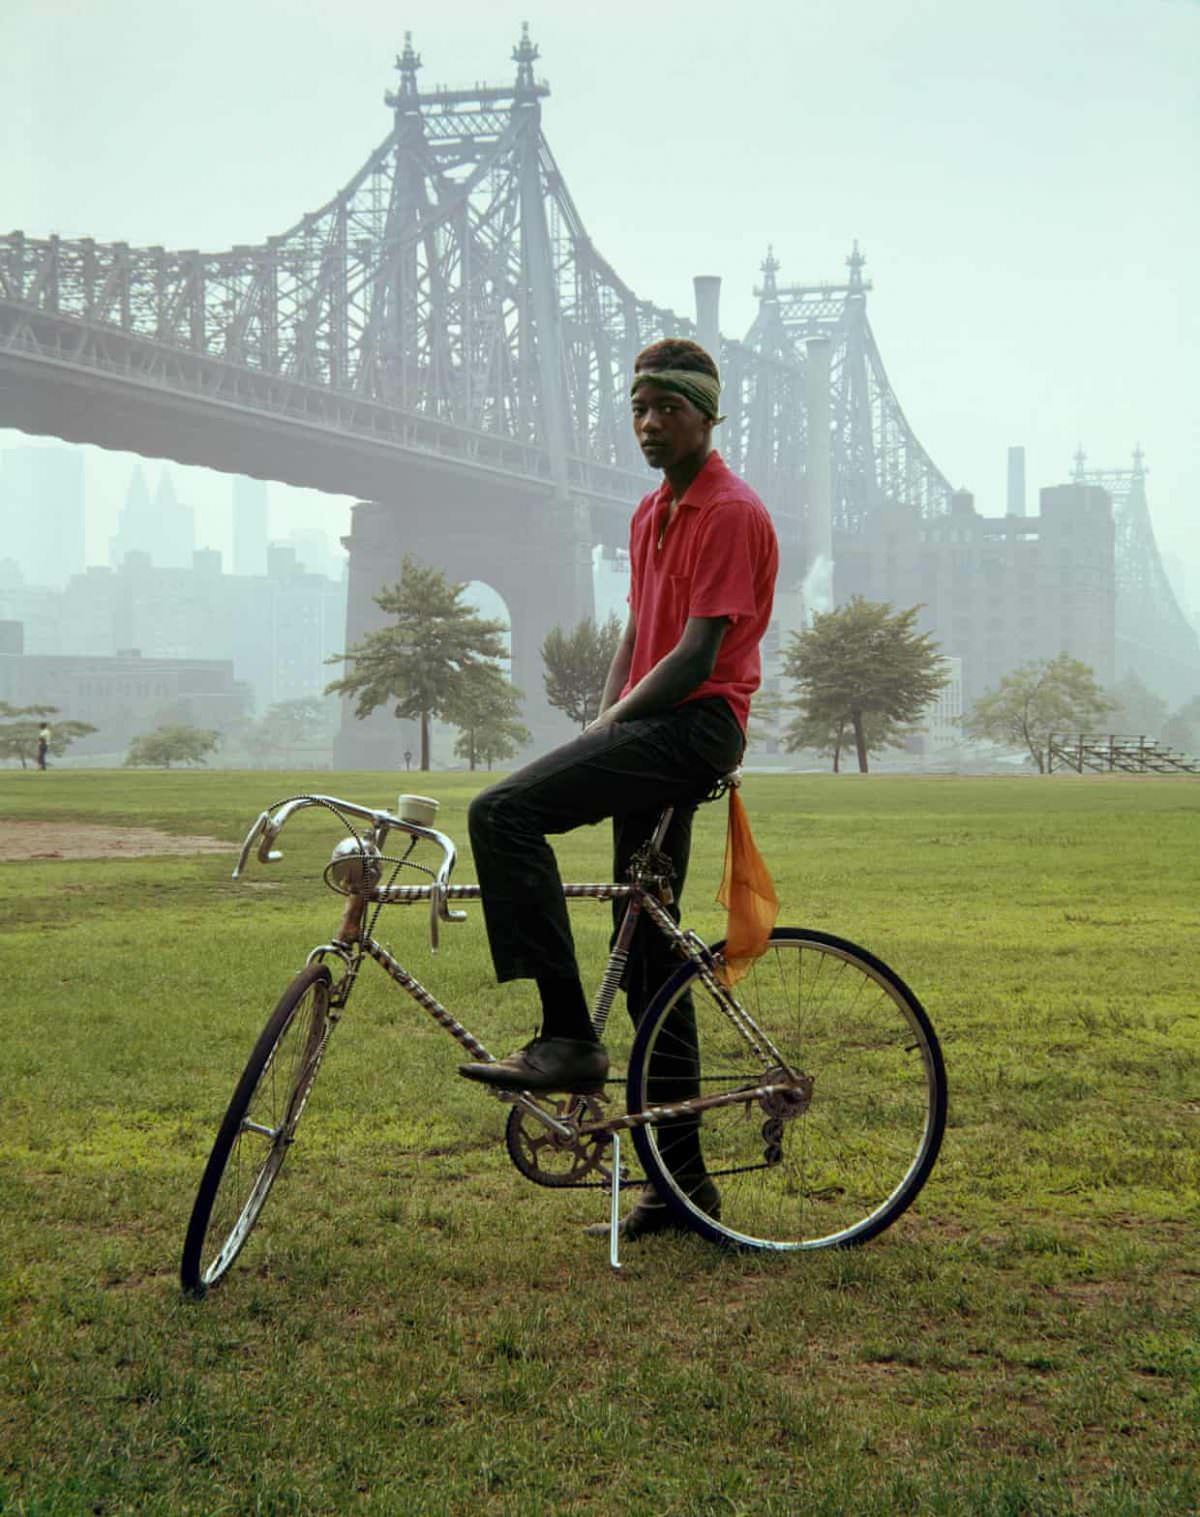 Life in the 1960s New York City Through the Lens of Evelyn Hofer